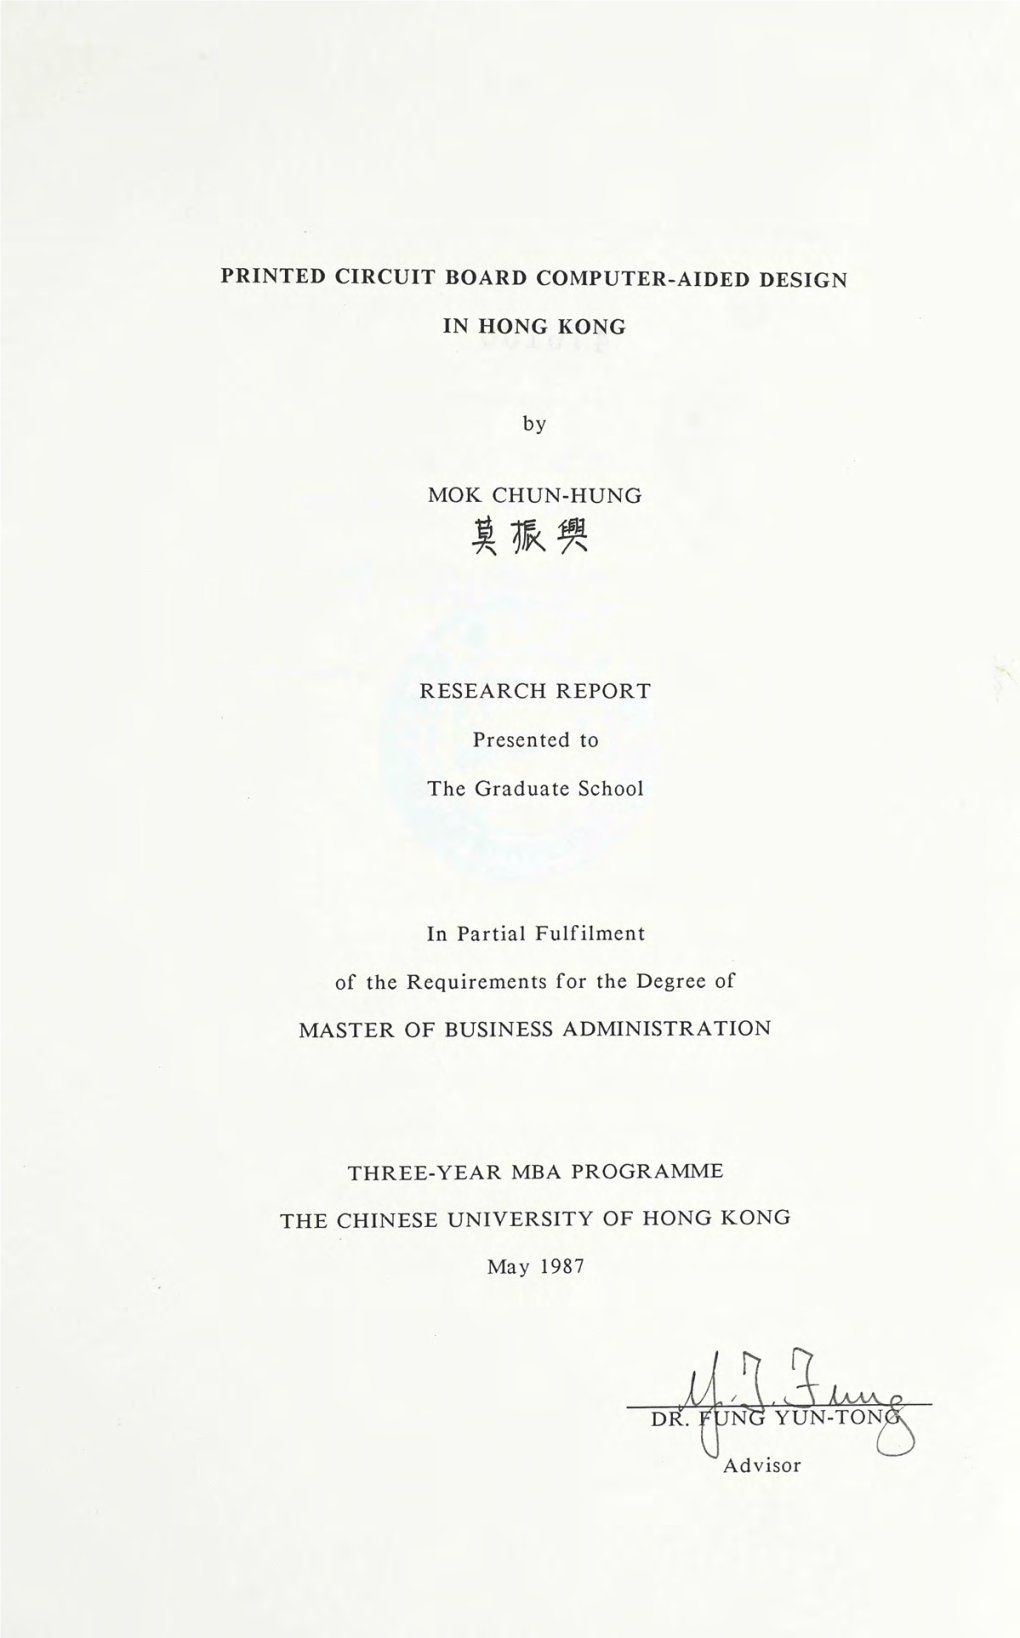 PRINTED CIRCUIT BOARD COMPUTER-AIDED DESIGN in HONG KONG by MOK CHUN-HUNG 莫 振 興 RESEARCH REPORT Presented to the Graduate